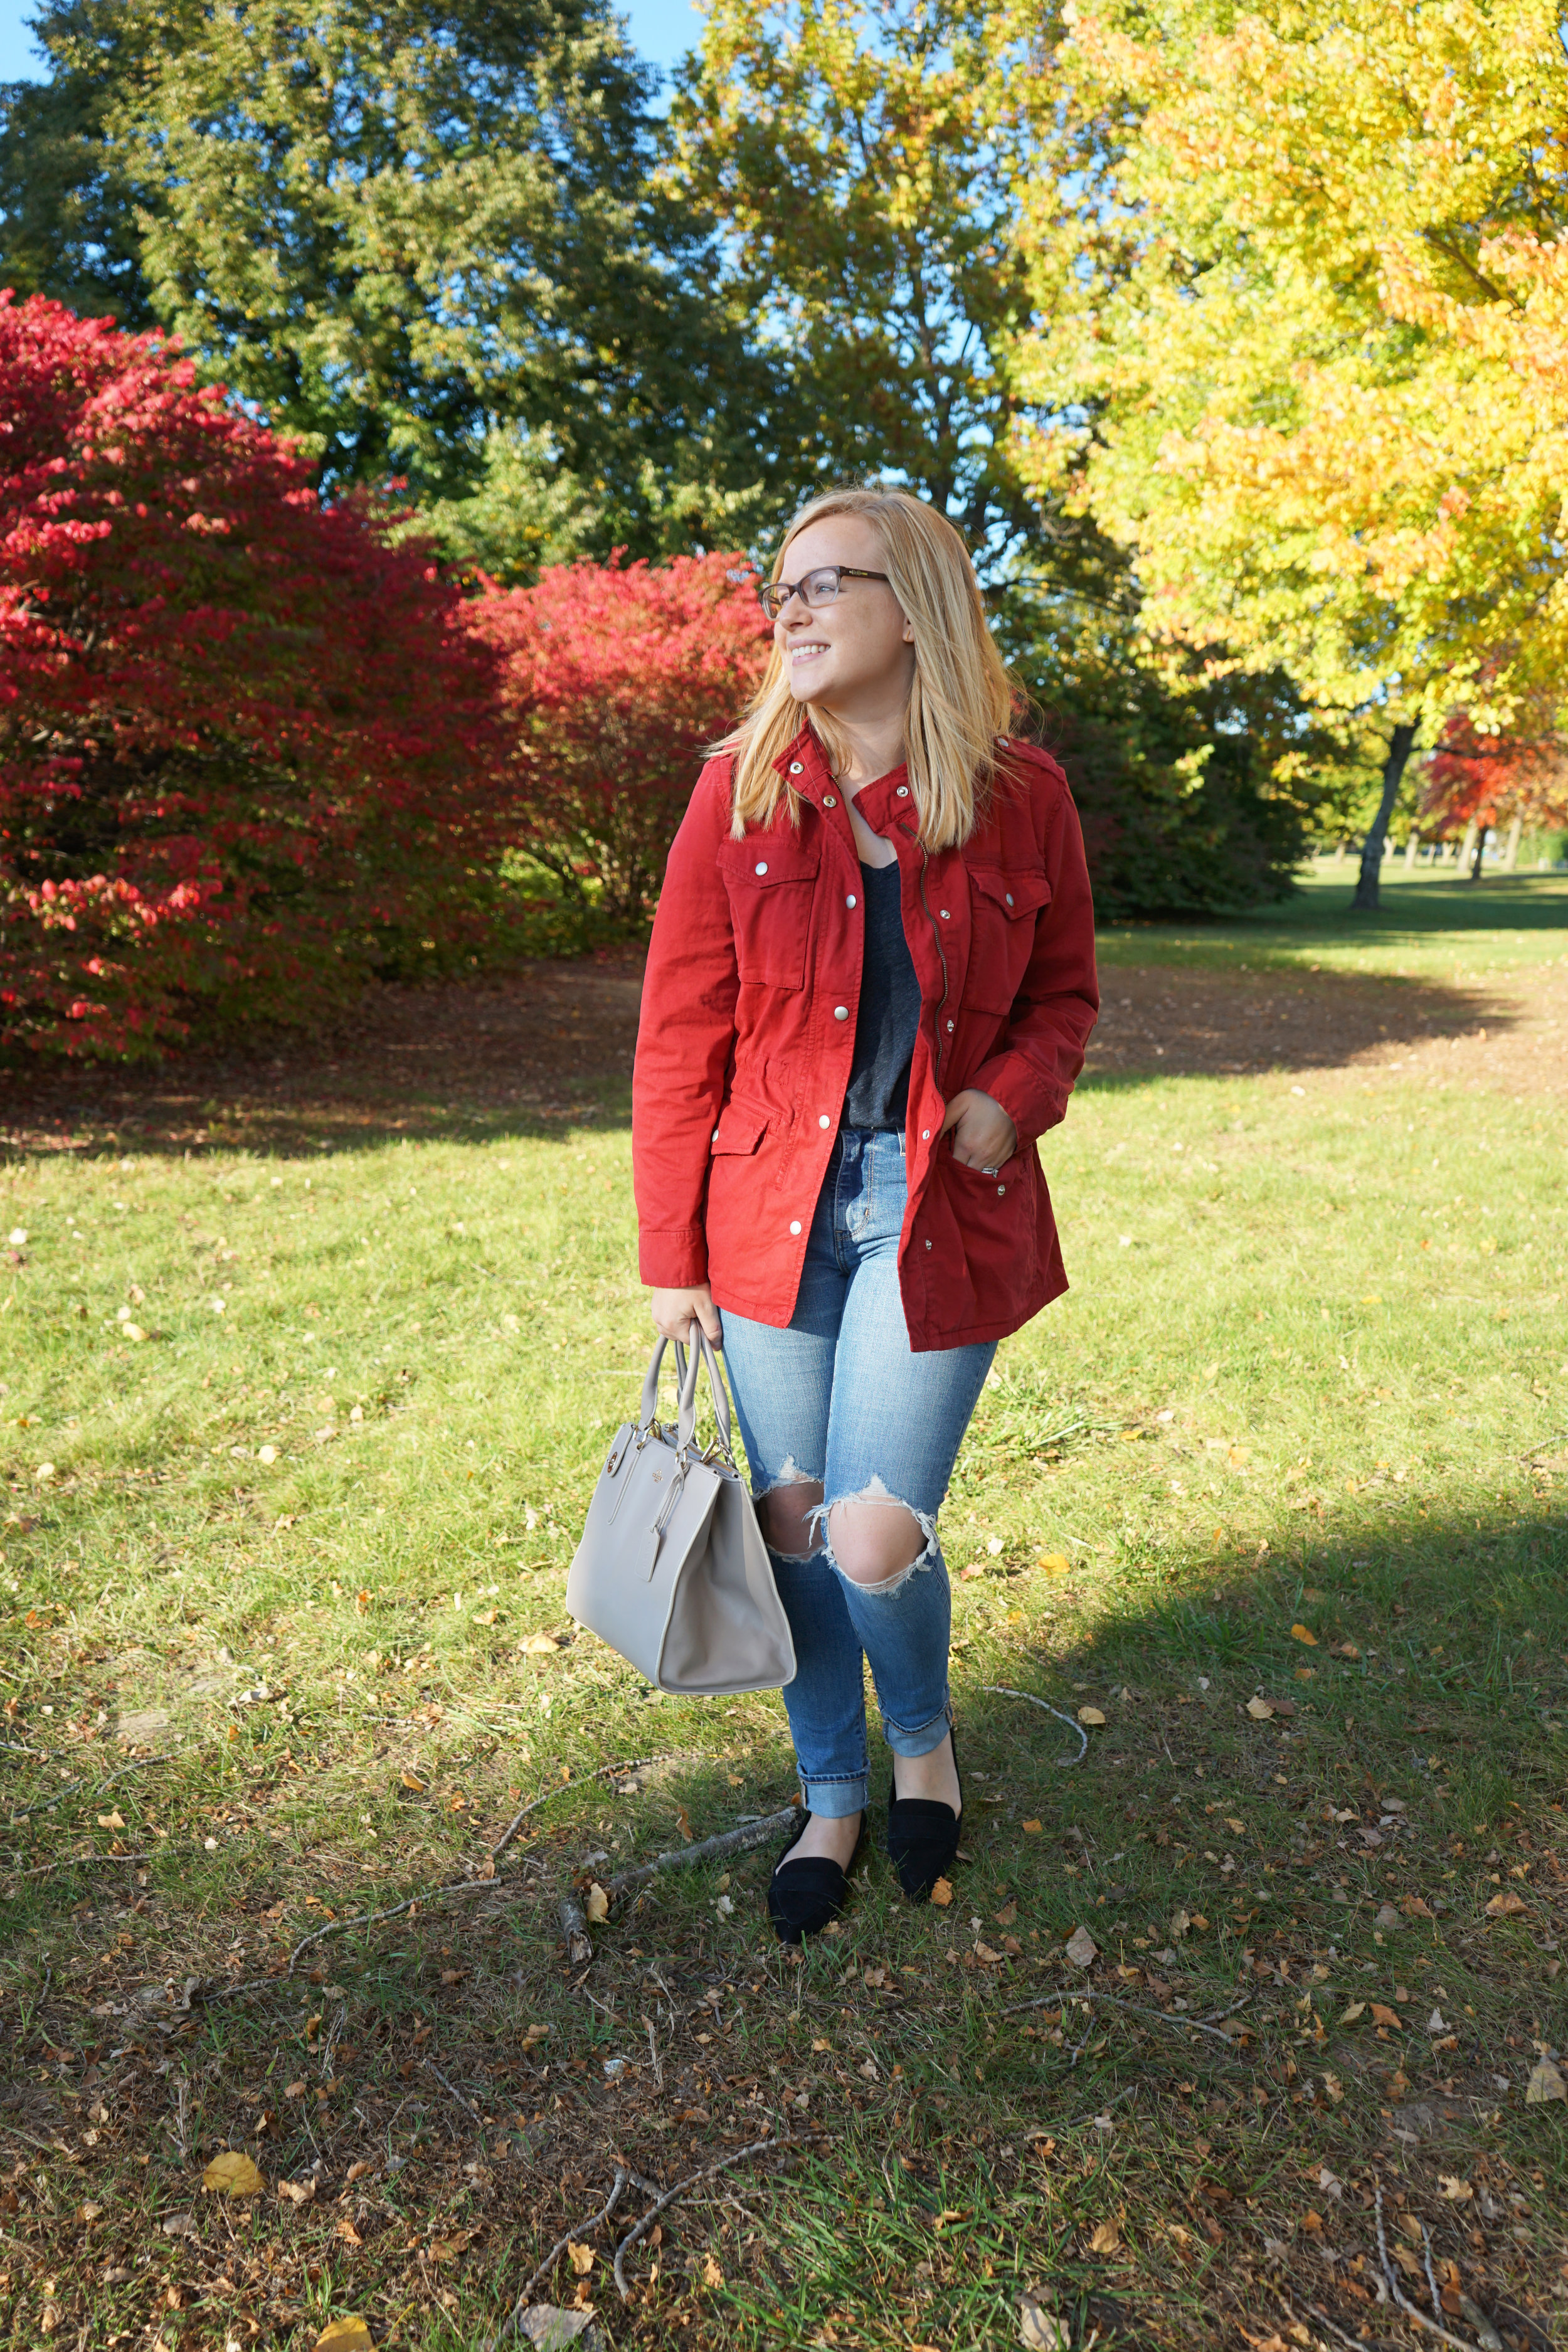 Gap classic utility jacket, Madewell whisper cotton v-neck tee, Levi's 721 High Rise distressed skinny jeans, Schutz Elise flats, Coach purse - Maggie a la Mode